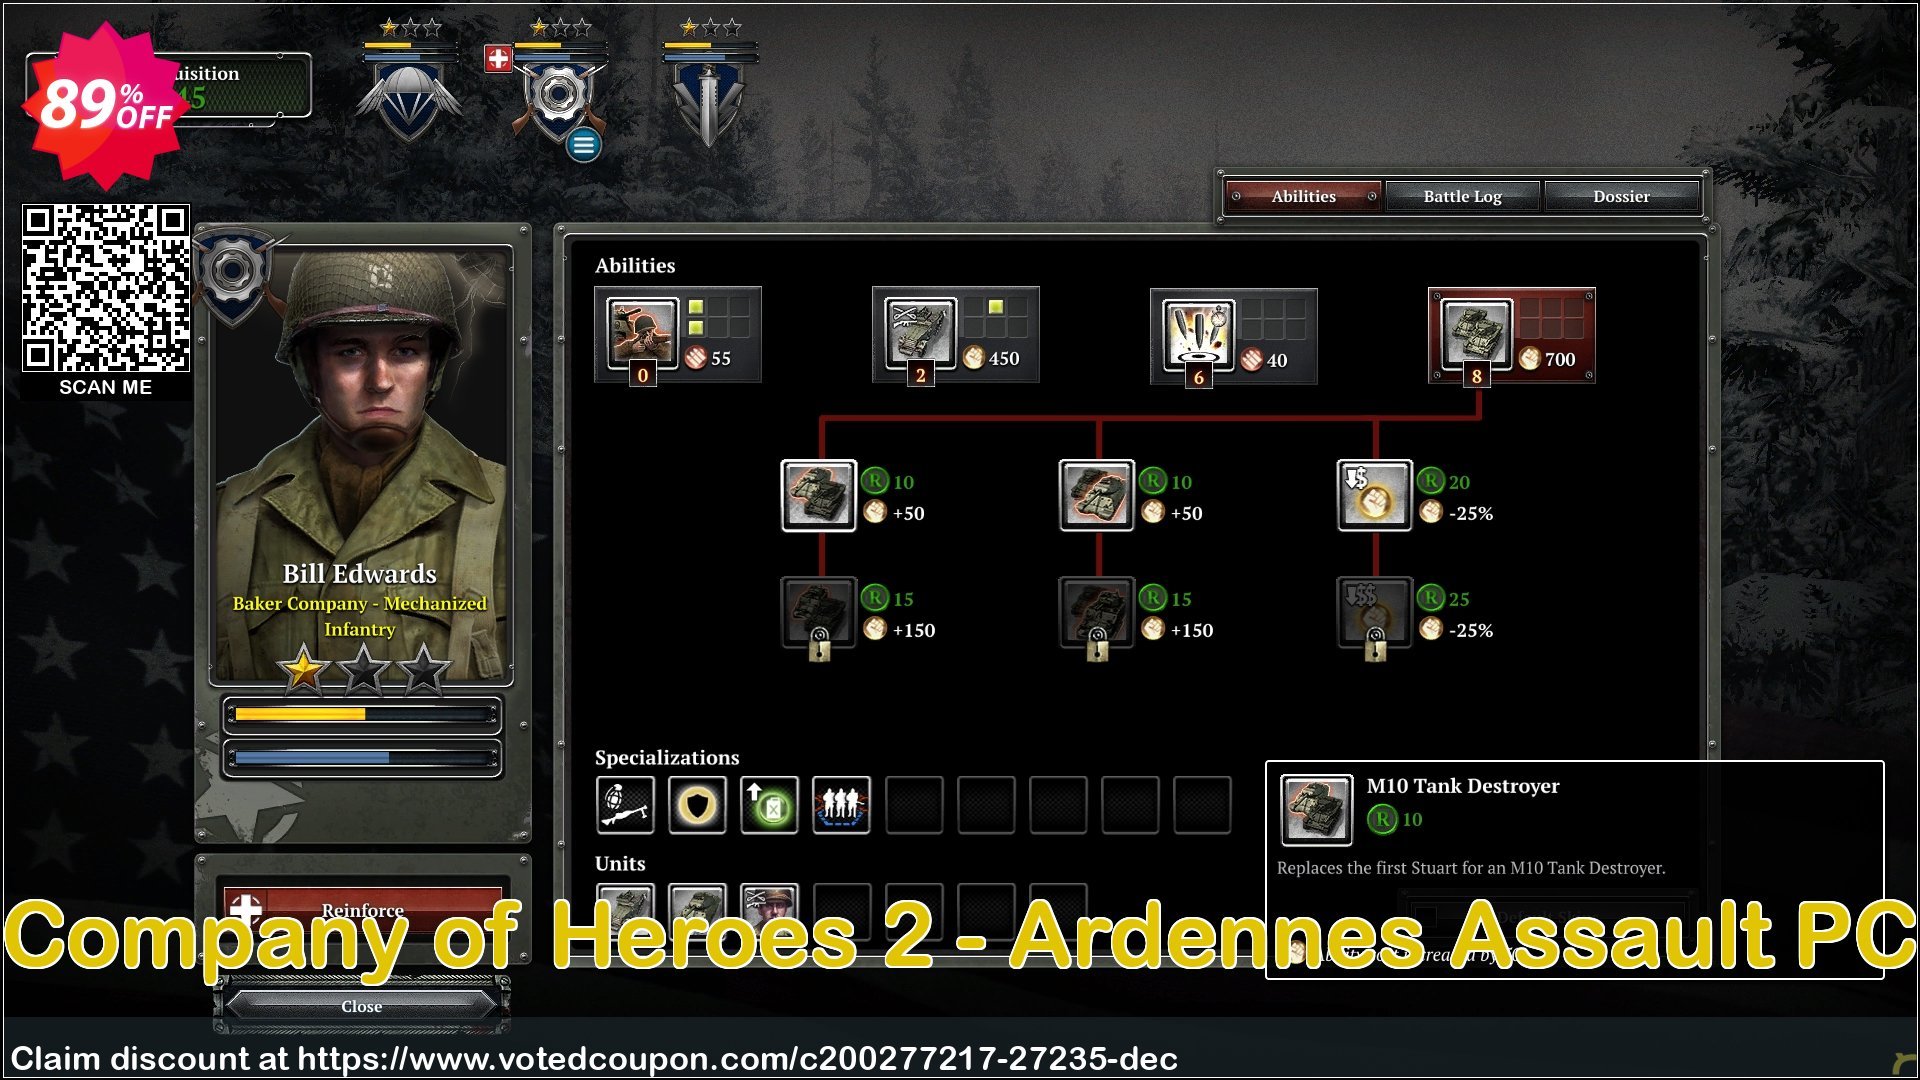 Company of Heroes 2 - Ardennes Assault PC Coupon Code May 2024, 89% OFF - VotedCoupon